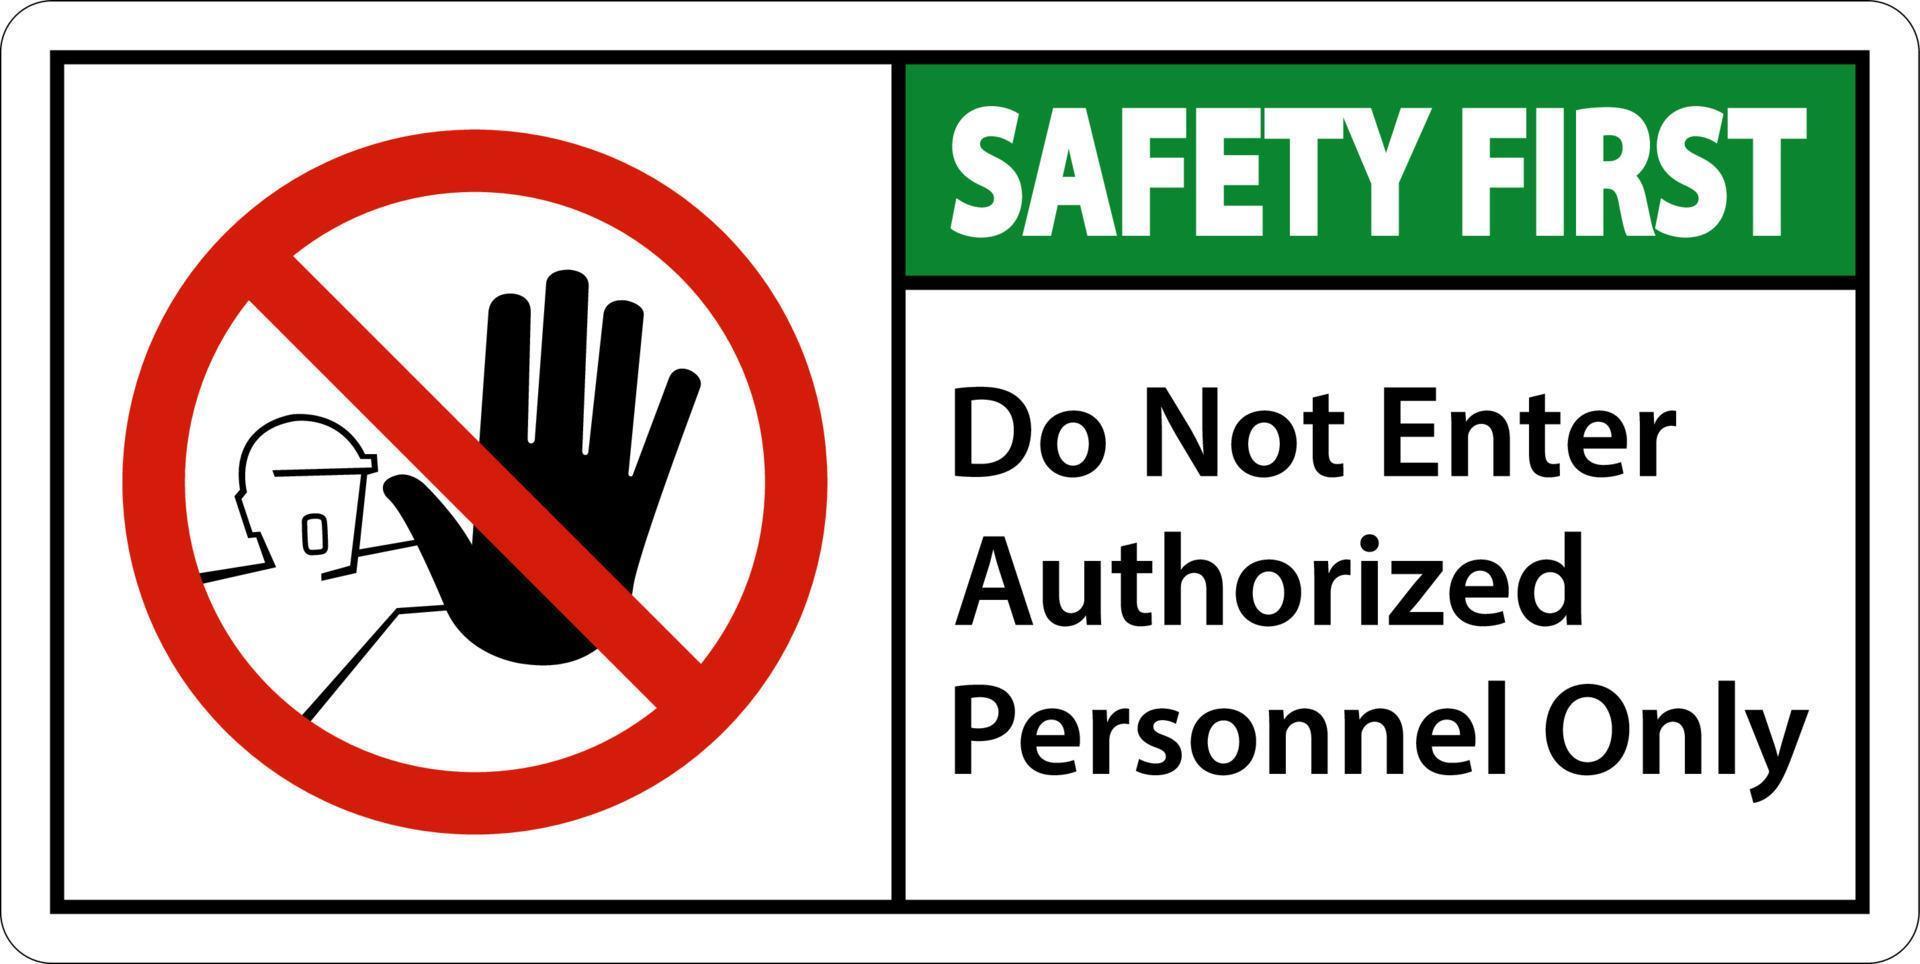 Safety First Do Not Enter Authorized Personnel Only Sign vector